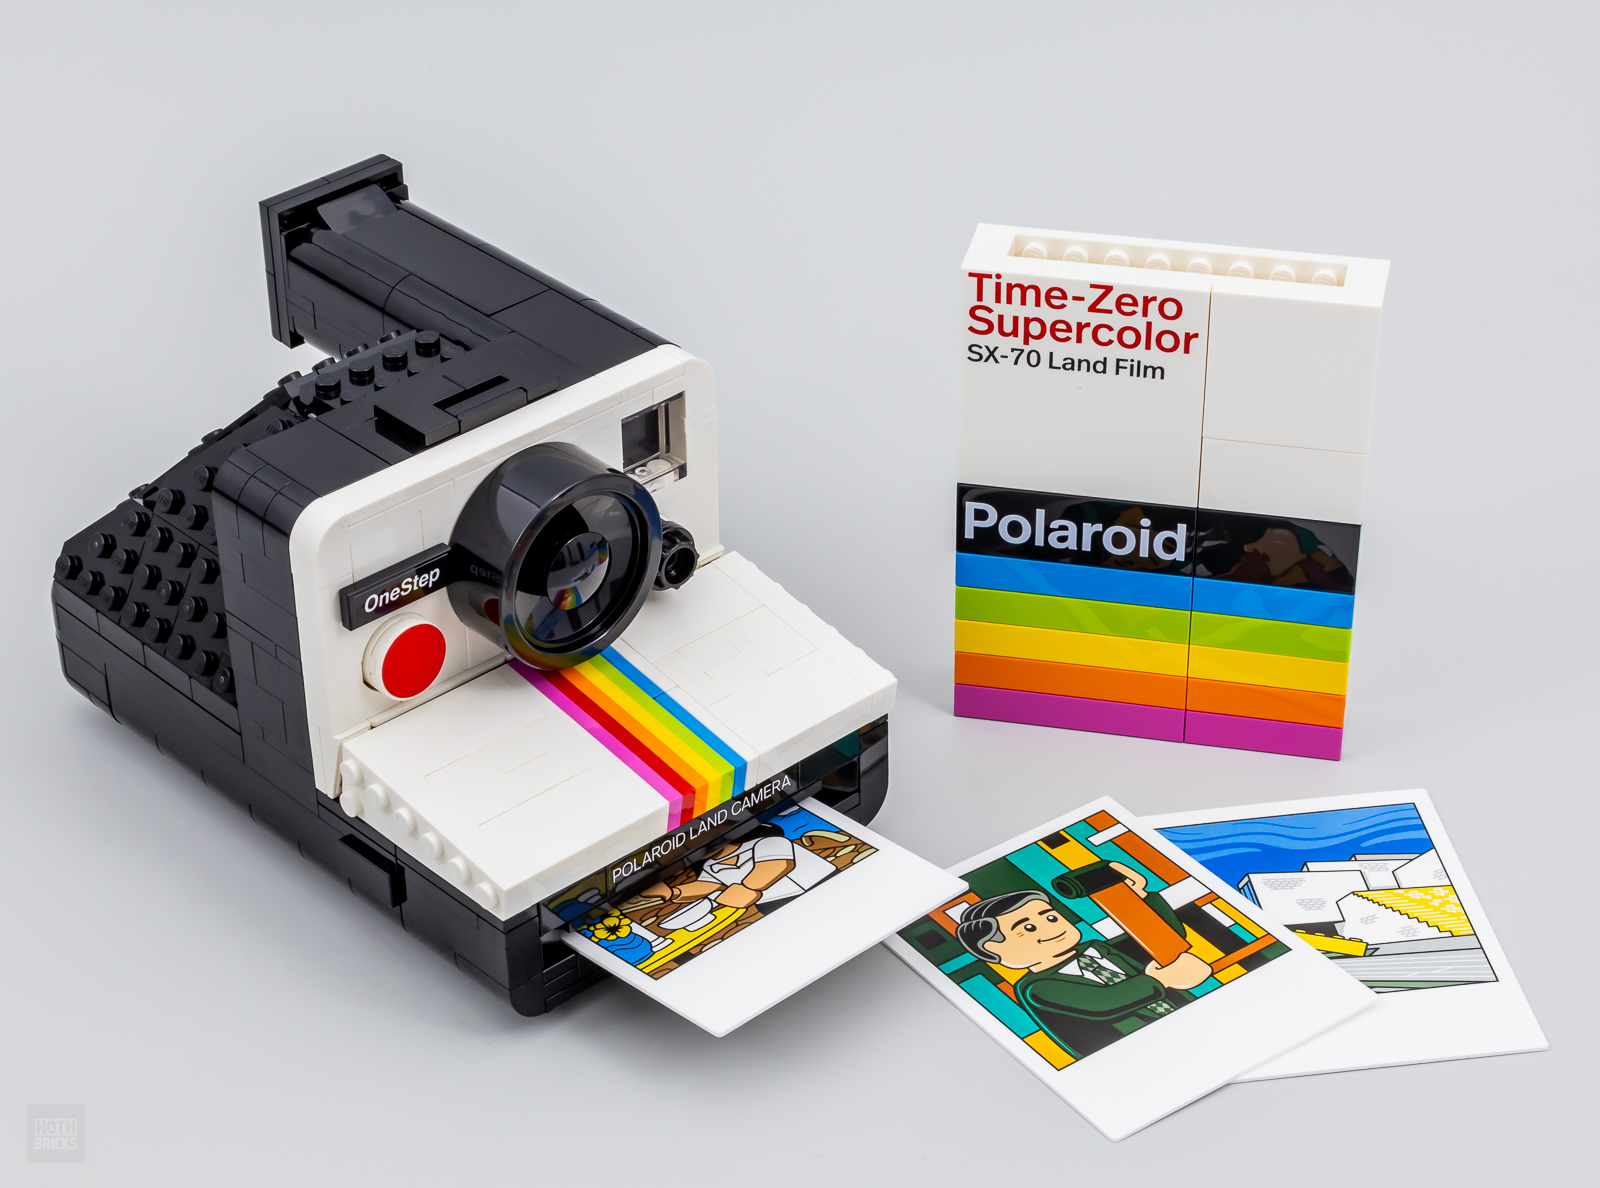 LEGO Ideas 21345 Polaroid compared to the real deal